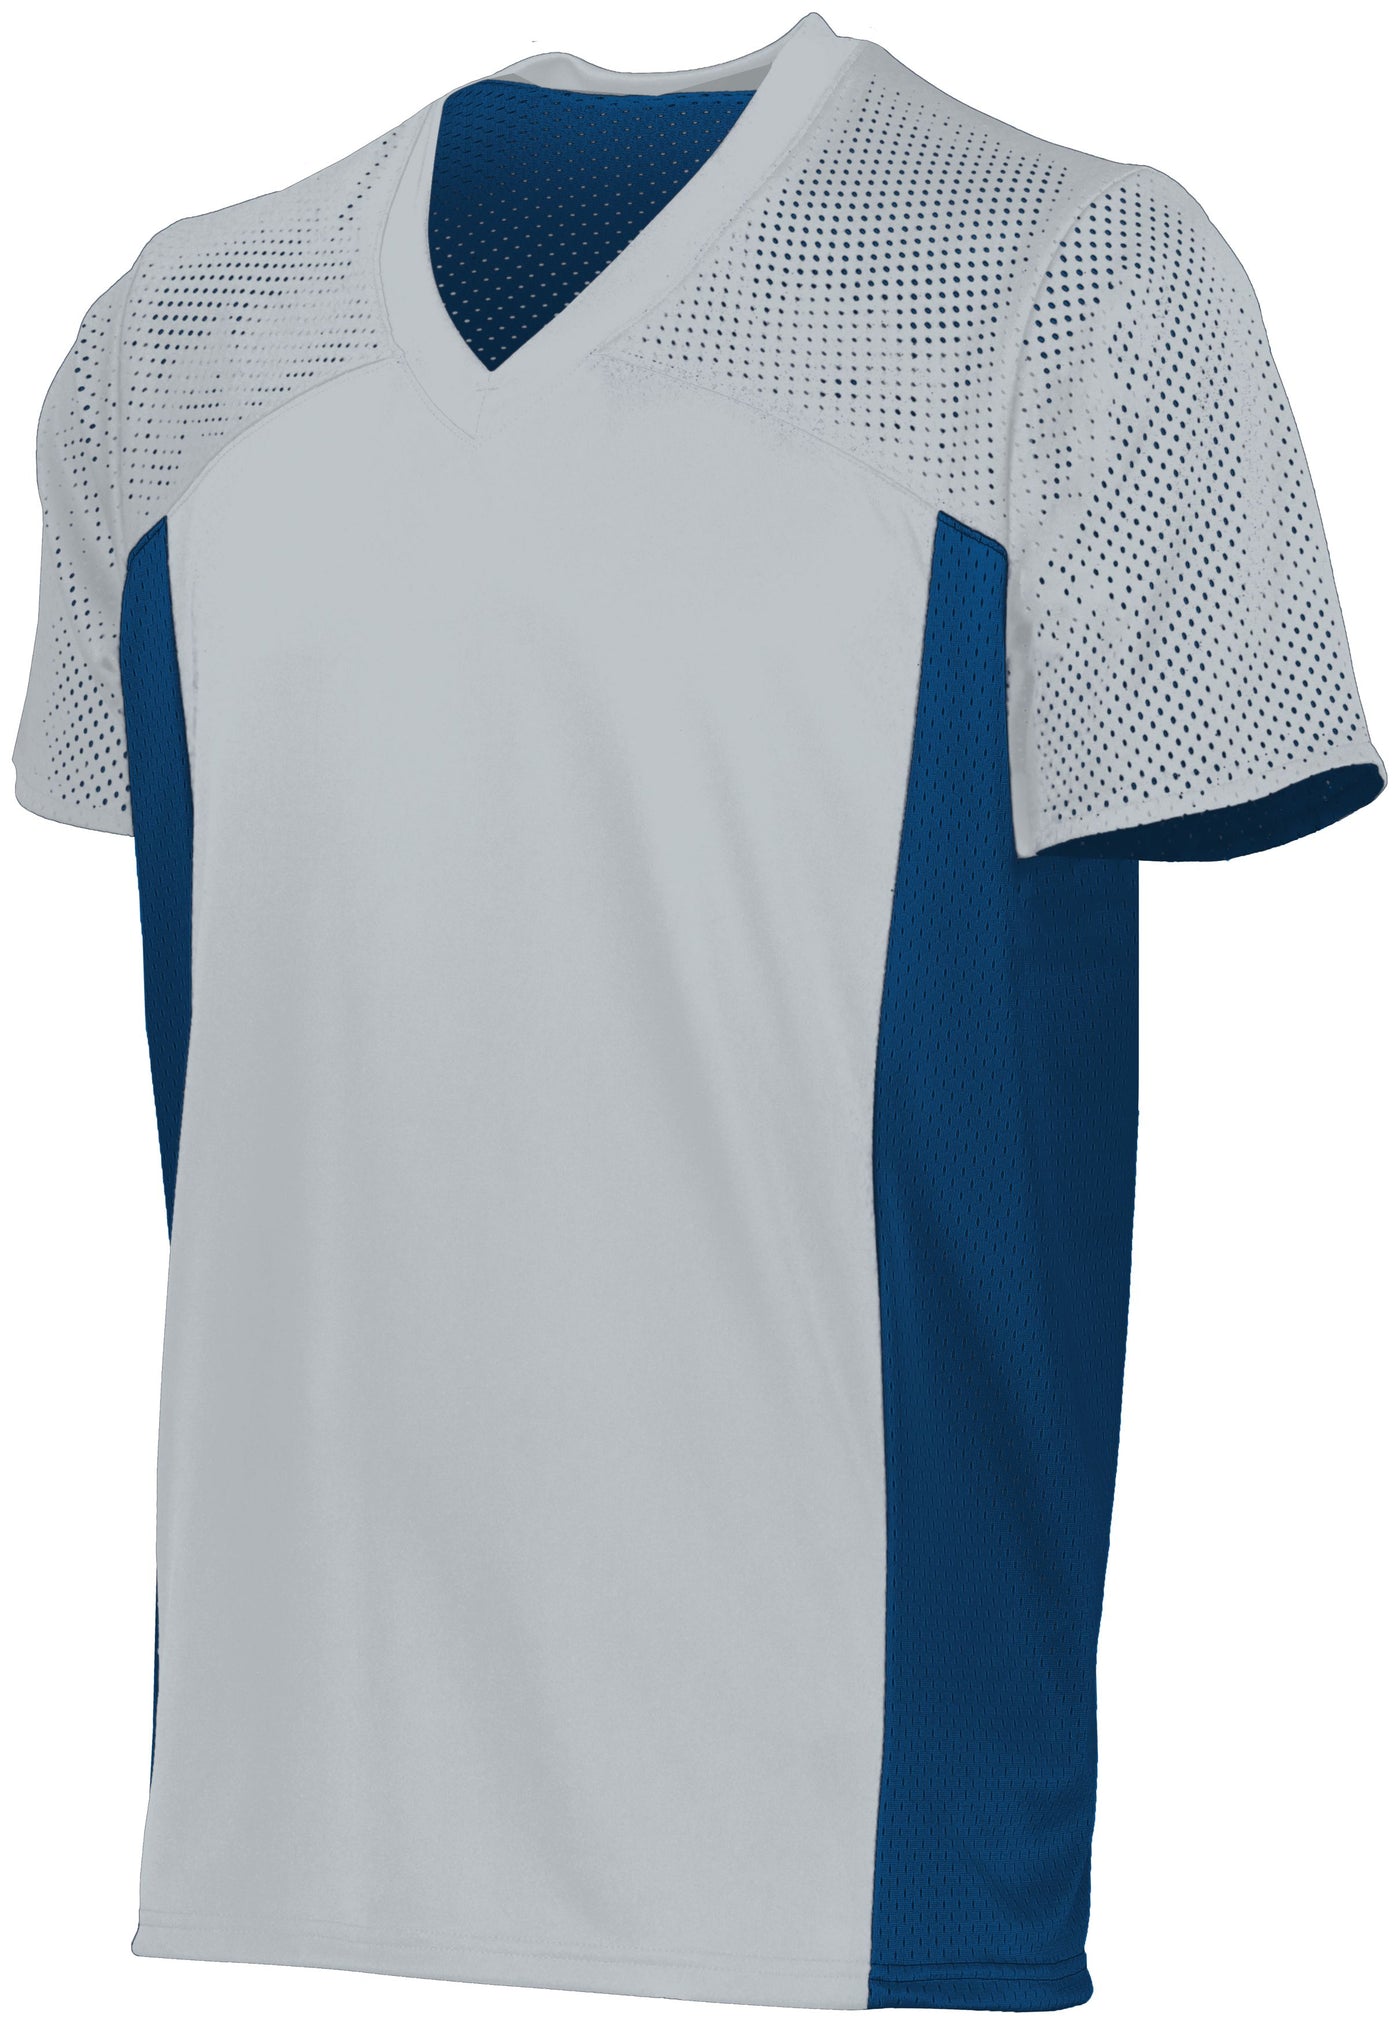 Youth Reversible Flag Football Jersey - Apparel Globe